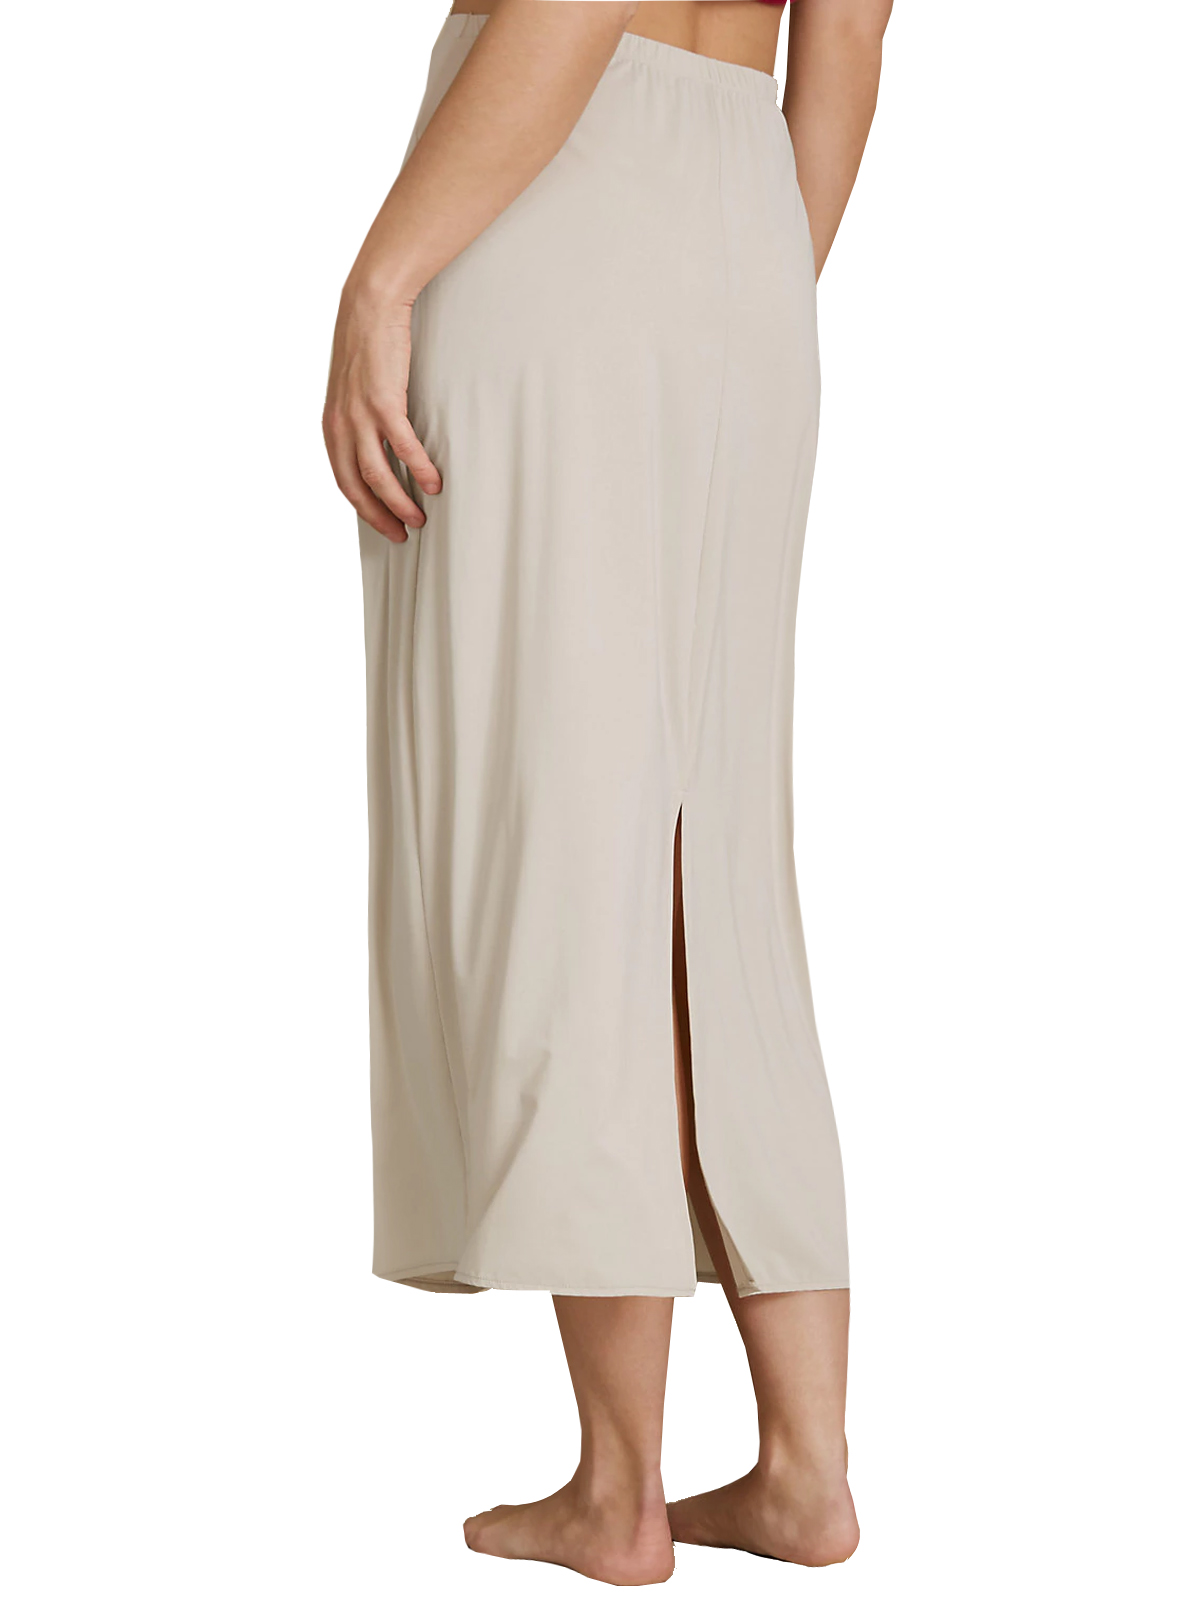 Marks and Spencer - - M&5 ALMOND Cool Comfort Maxi Waist Slip - Size 8 ...